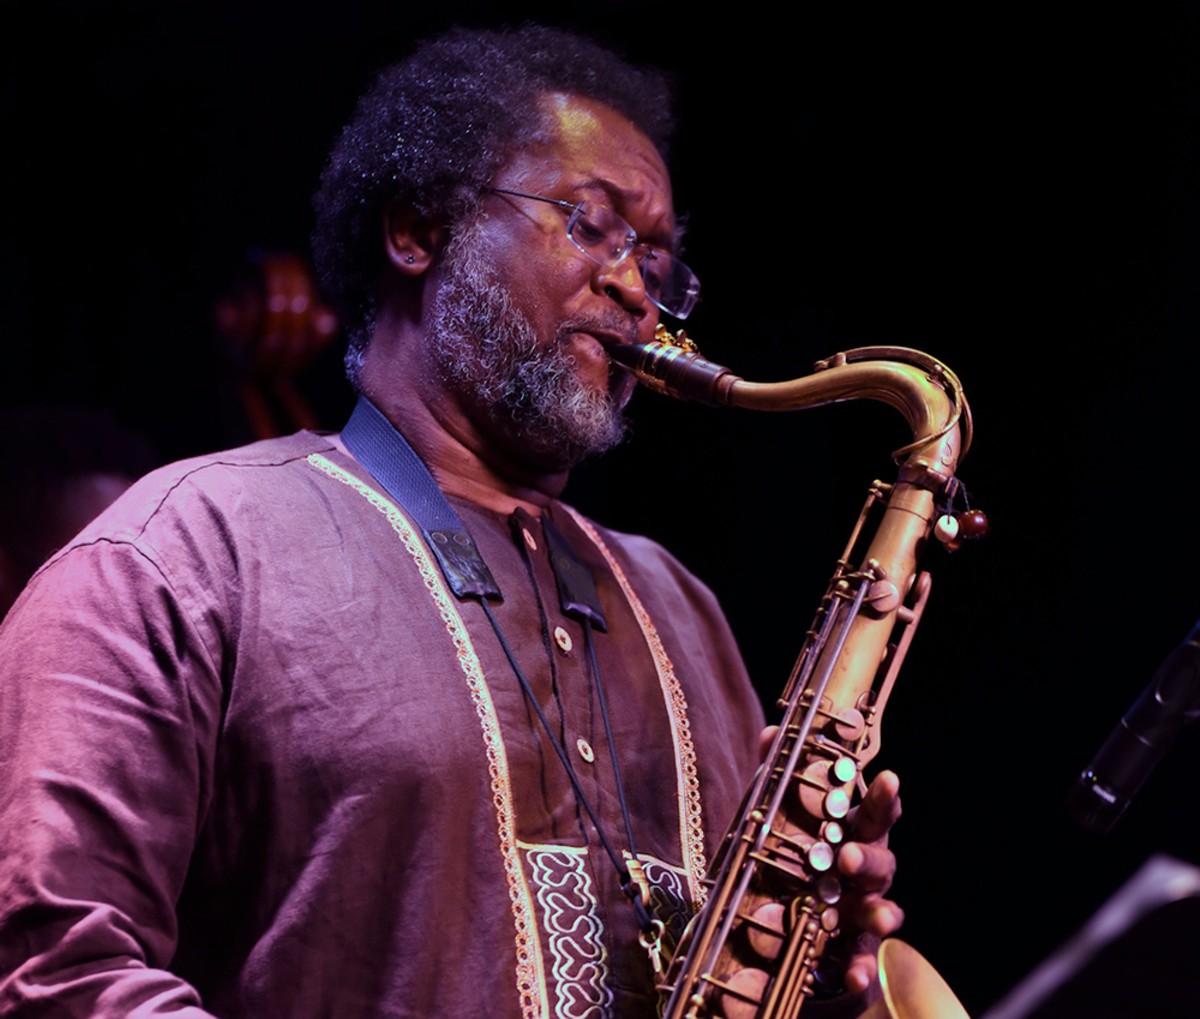 Salim Washington, a widely respected scholar and practitioner of Black music, will perform two sets at Cliff Bell’s this Saturday.